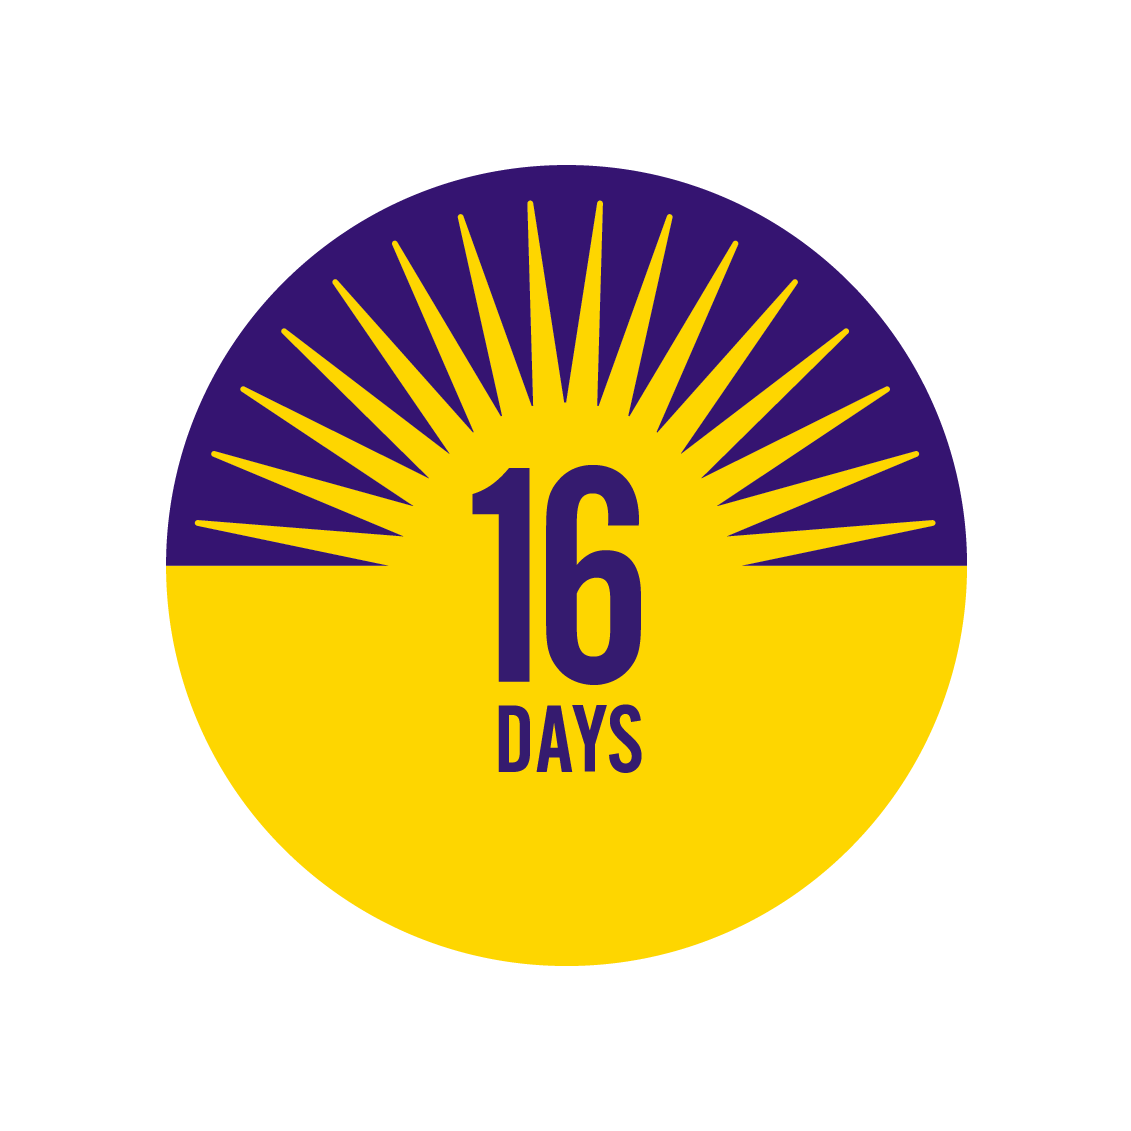 16 days logo with a purple background and yellow sun 